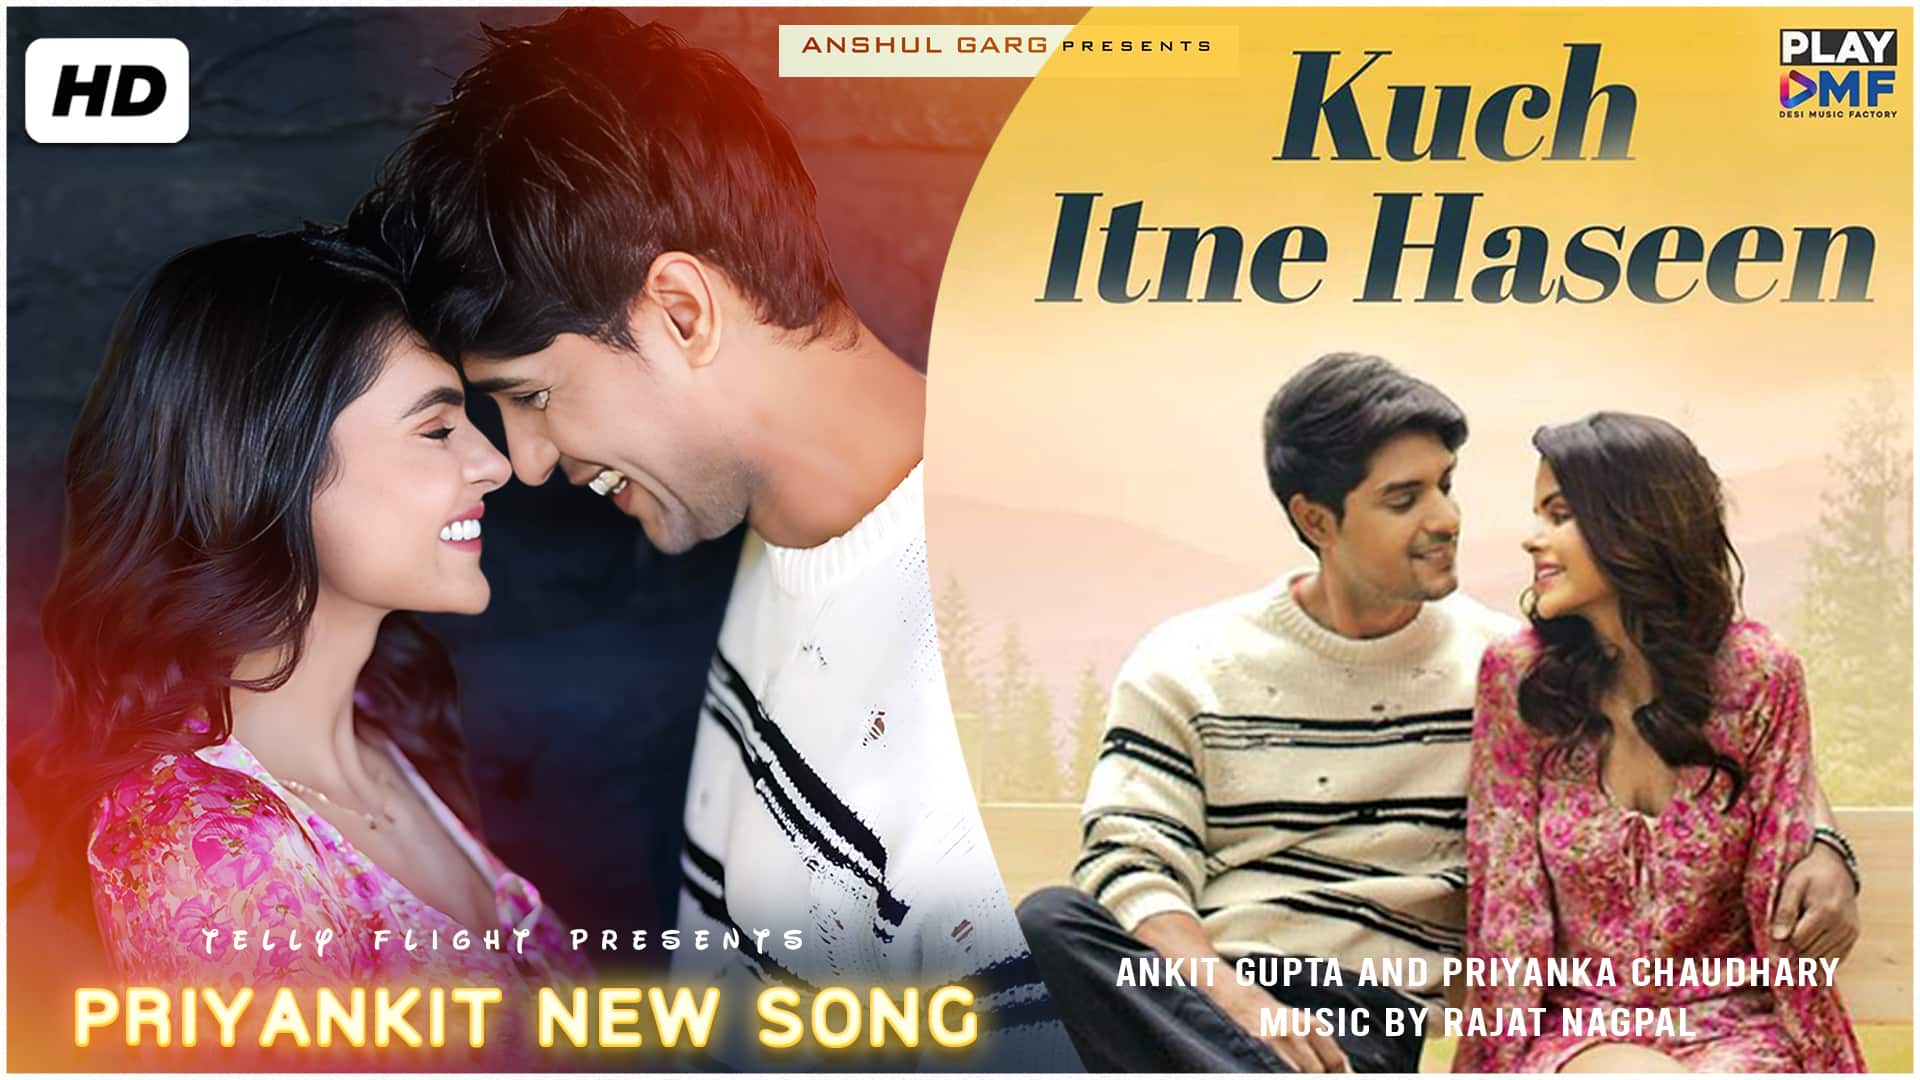 priyanka ankit new song, priyankit new song, priyanka and ankit new song, ankit priyanka new song, Kuch Itne Haseen Song, Kuch Itne Haseen Song priyankit, priyankit song release date, Kuch Itne Haseen song cast,